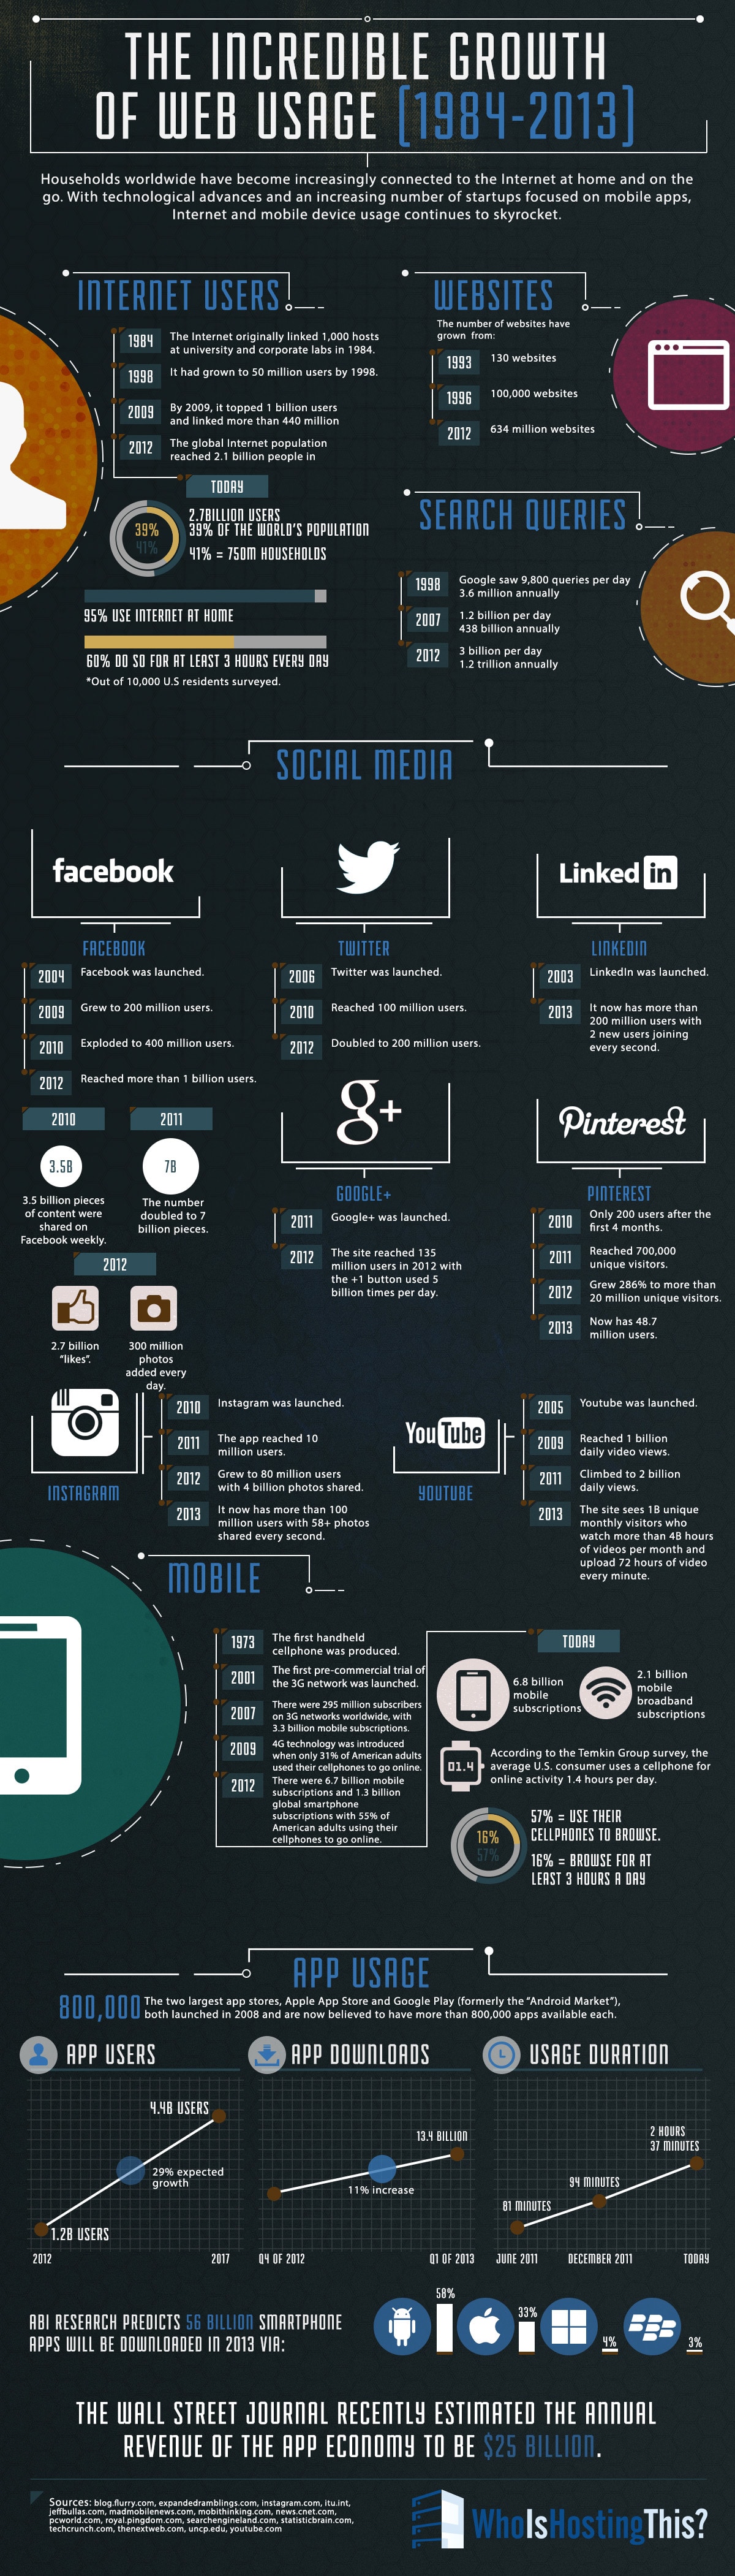 internet-growth-1984-2013-infographic